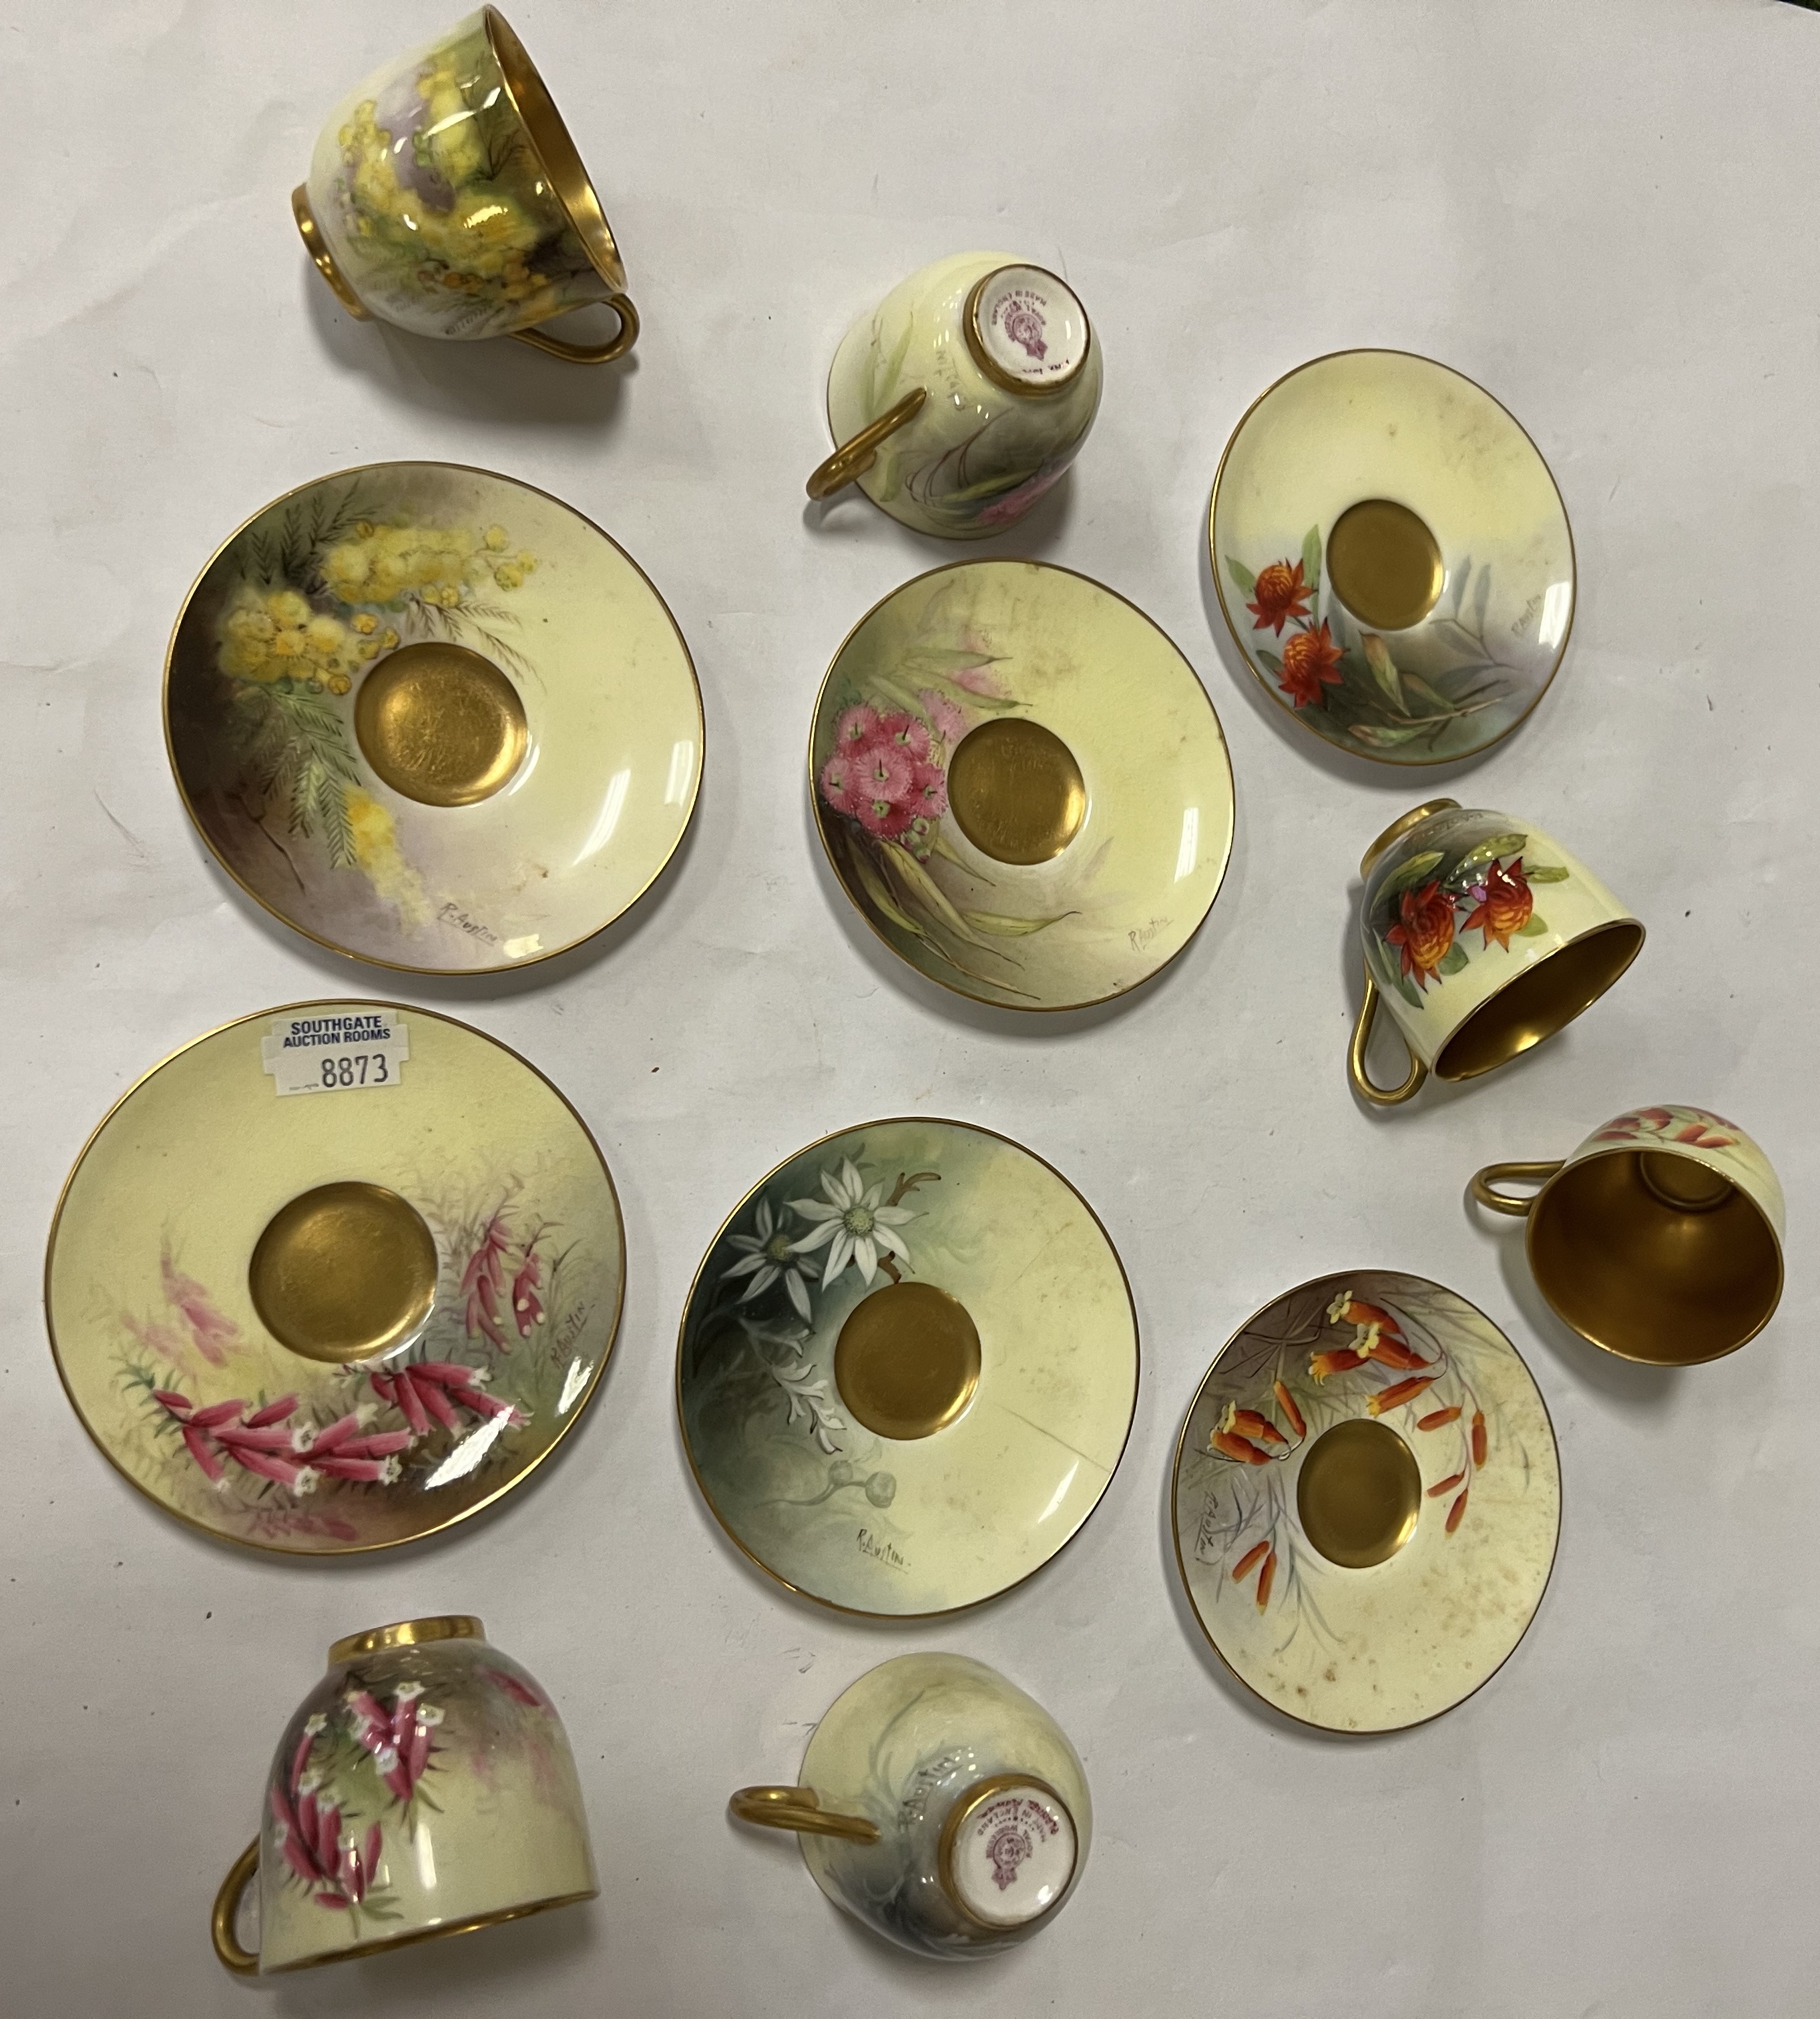 6 ROYAL WORSCESTER CUPS & SAUCERS - HANDPAINTED & SIGNED BY P. AUSTIN ''FLORAL DESIGN'' - Image 2 of 3